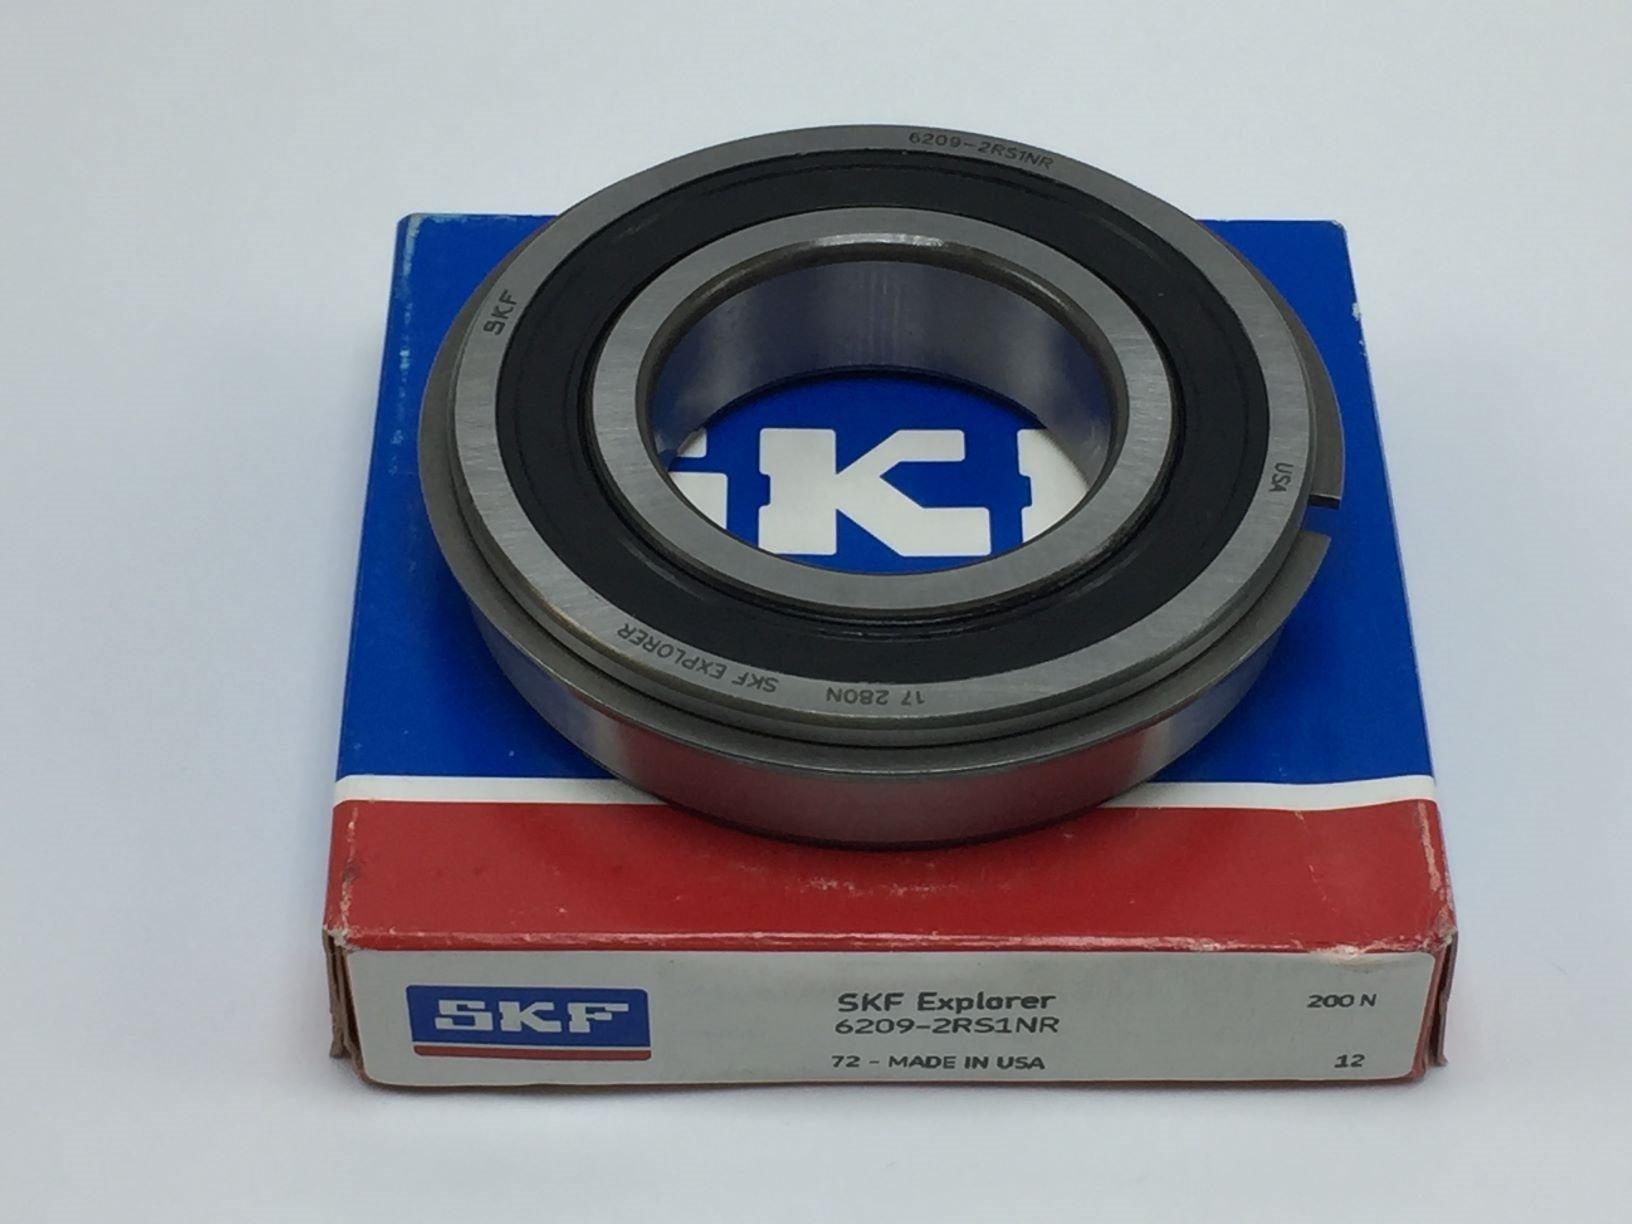 NEW SKF 6209-2RS1NR RADIAL DEEP GROOVE BALL BEARING 45MM BORE PN# 6209-2RS1NR 